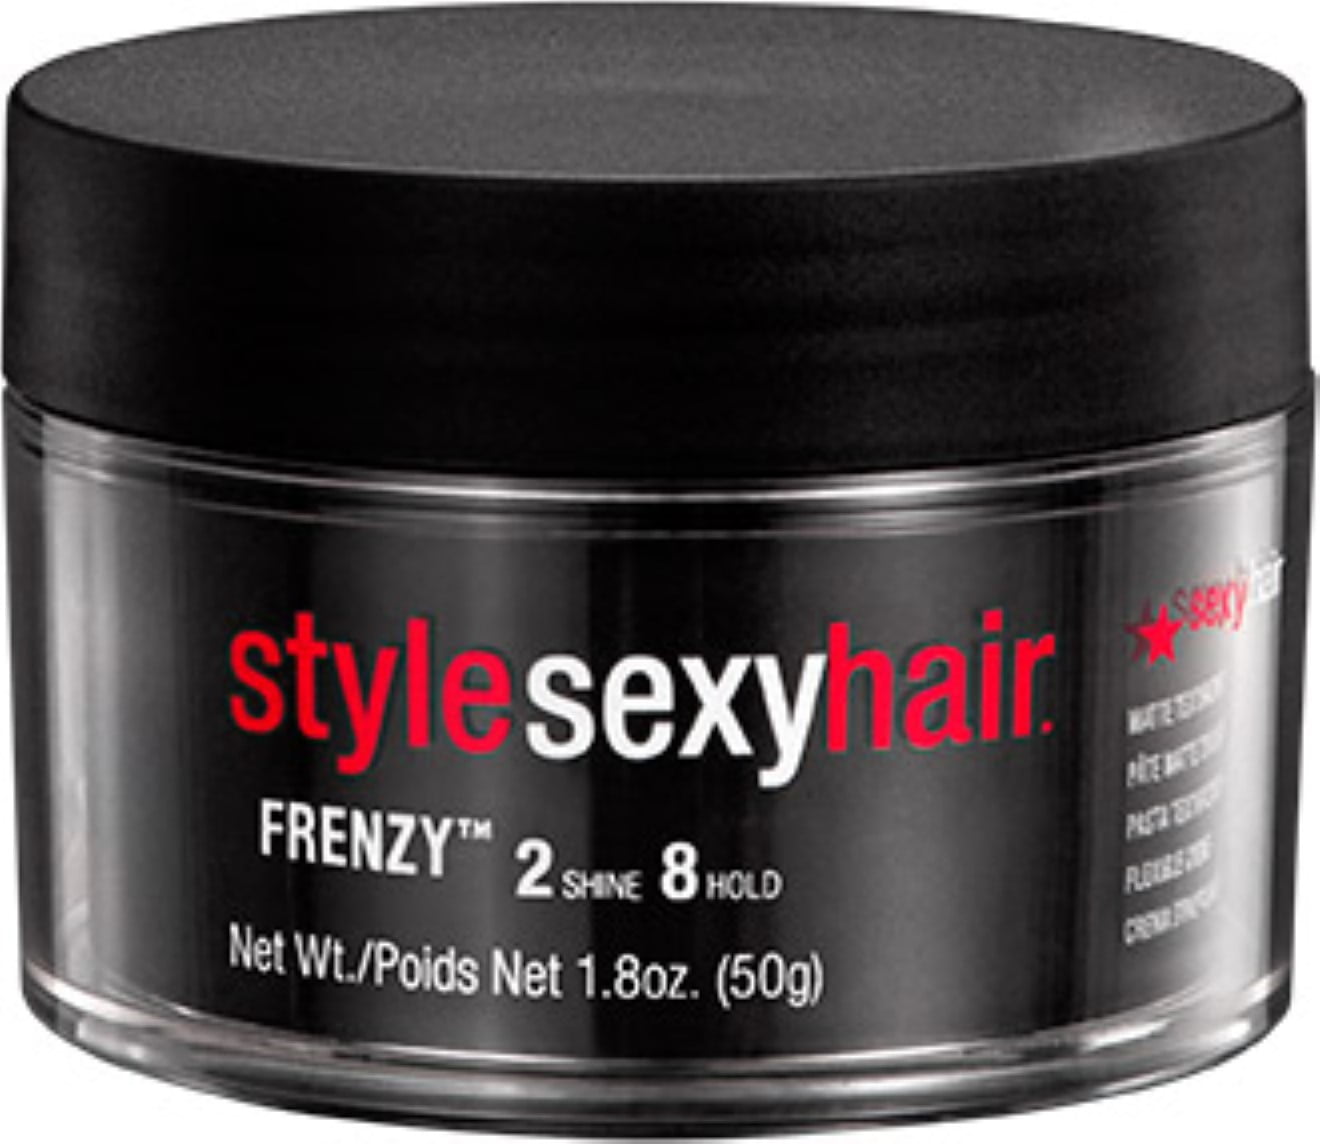 Sexy Hair Concepts Short Sexy Hair Frenzy Texture Paste 18 Oz Pack 